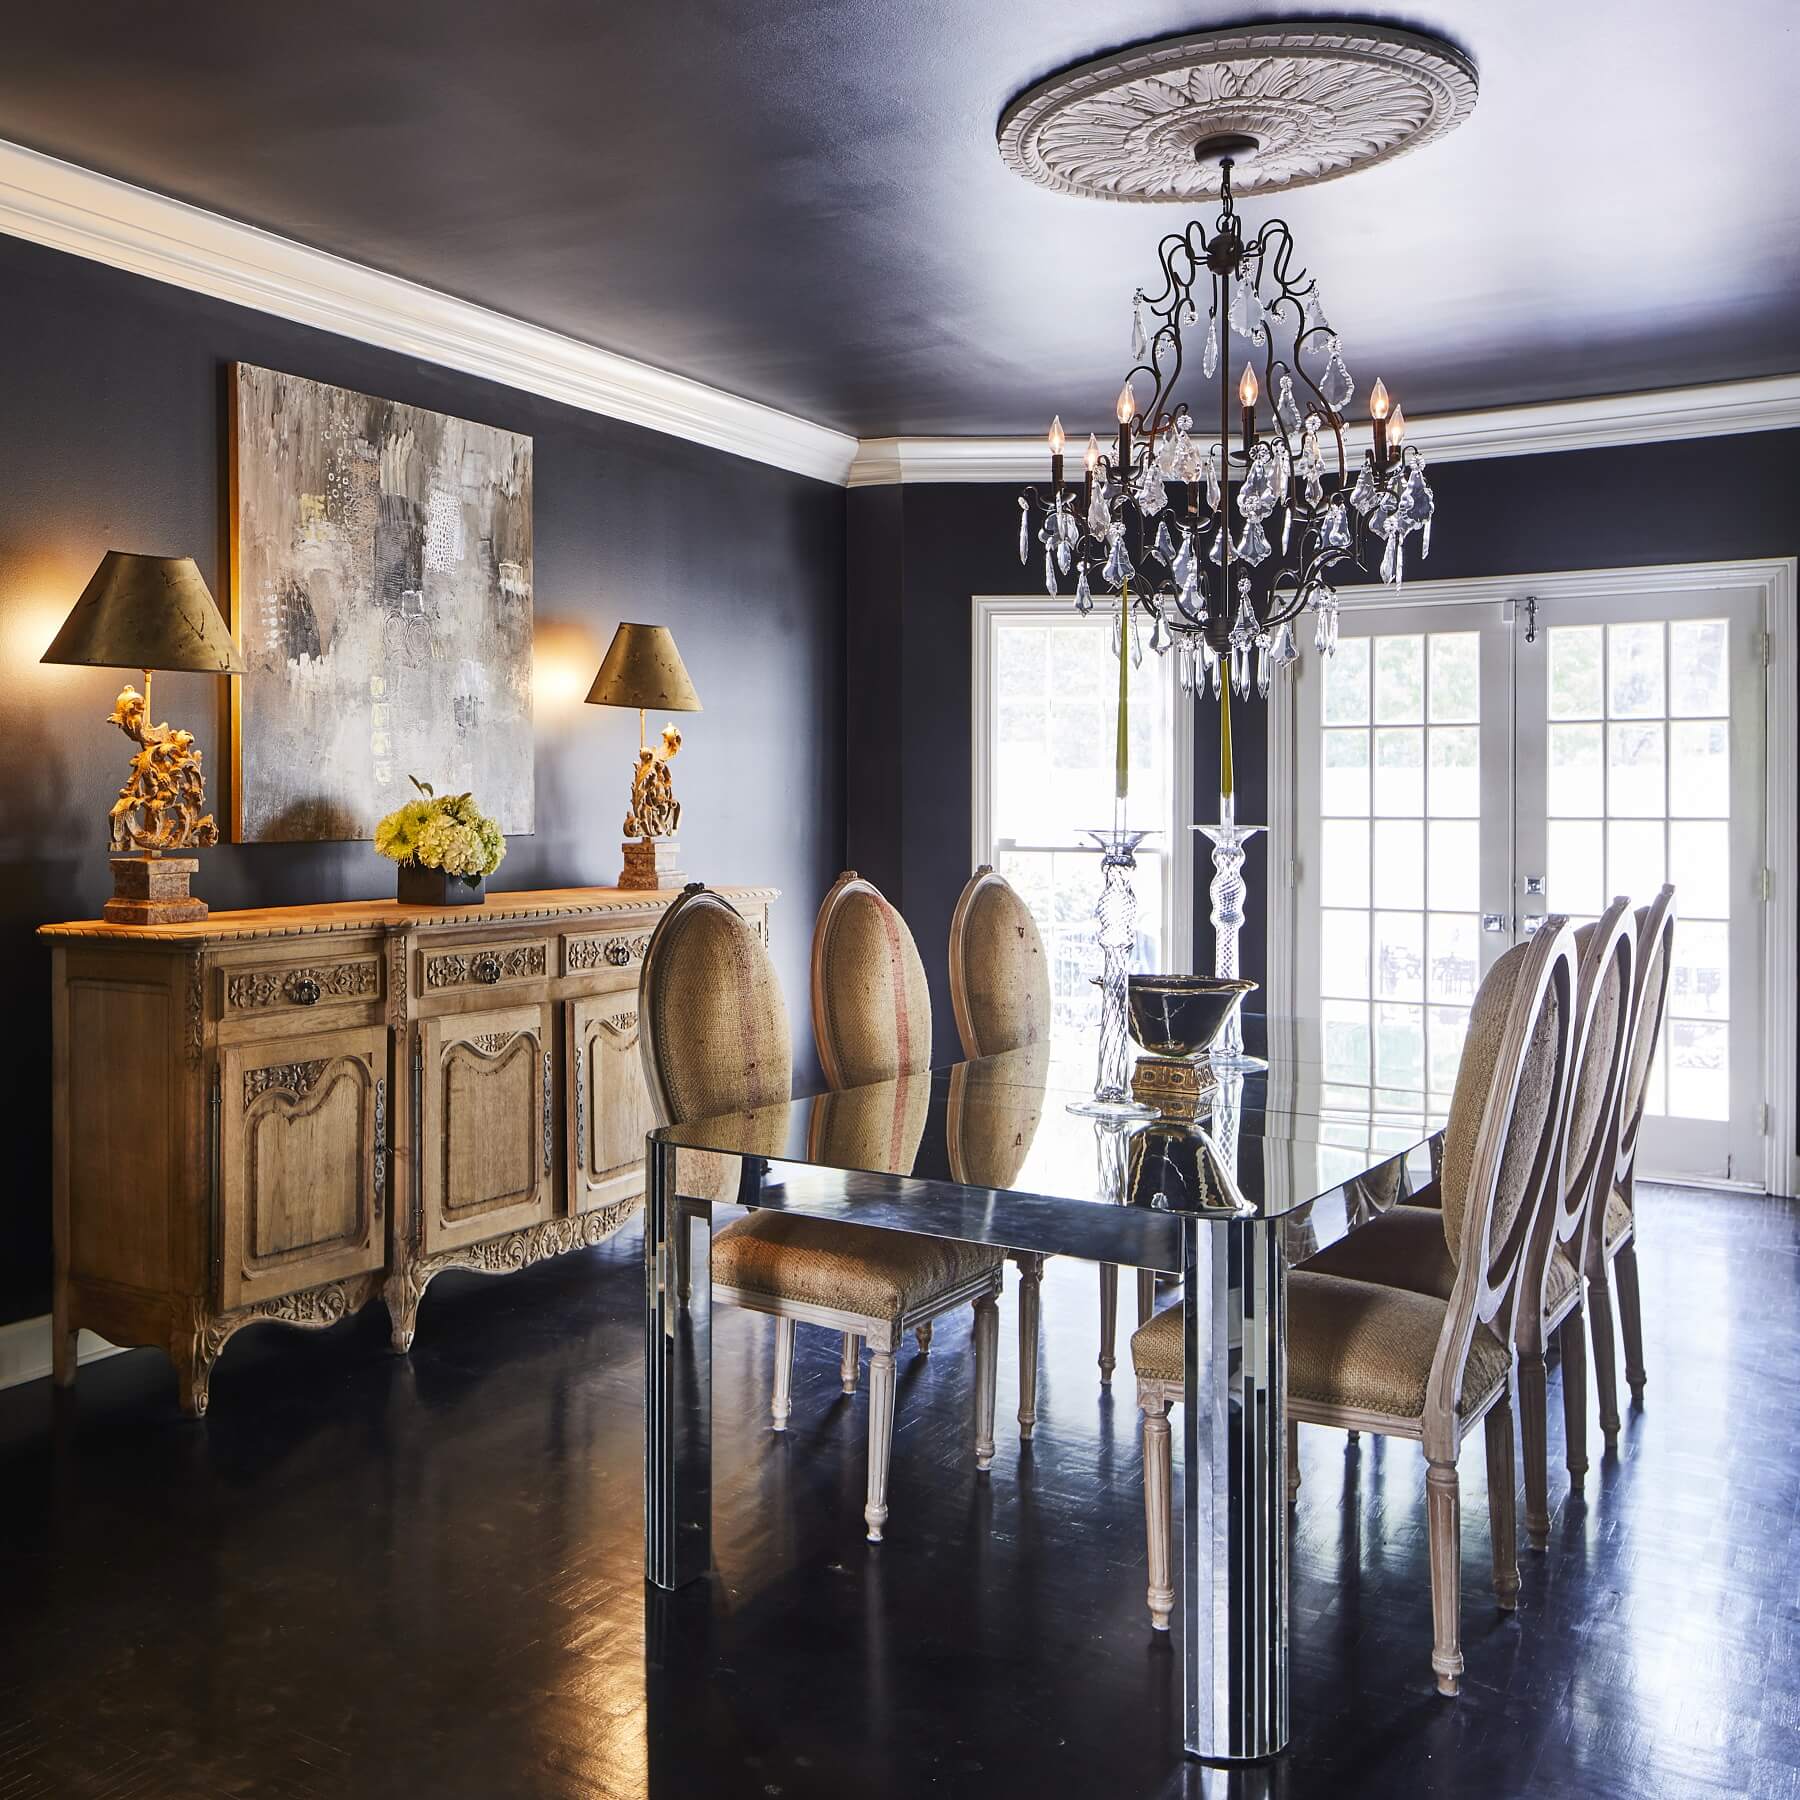 French-style chairs and an antique French sideboard flank the modern mirrored table in the dining room.